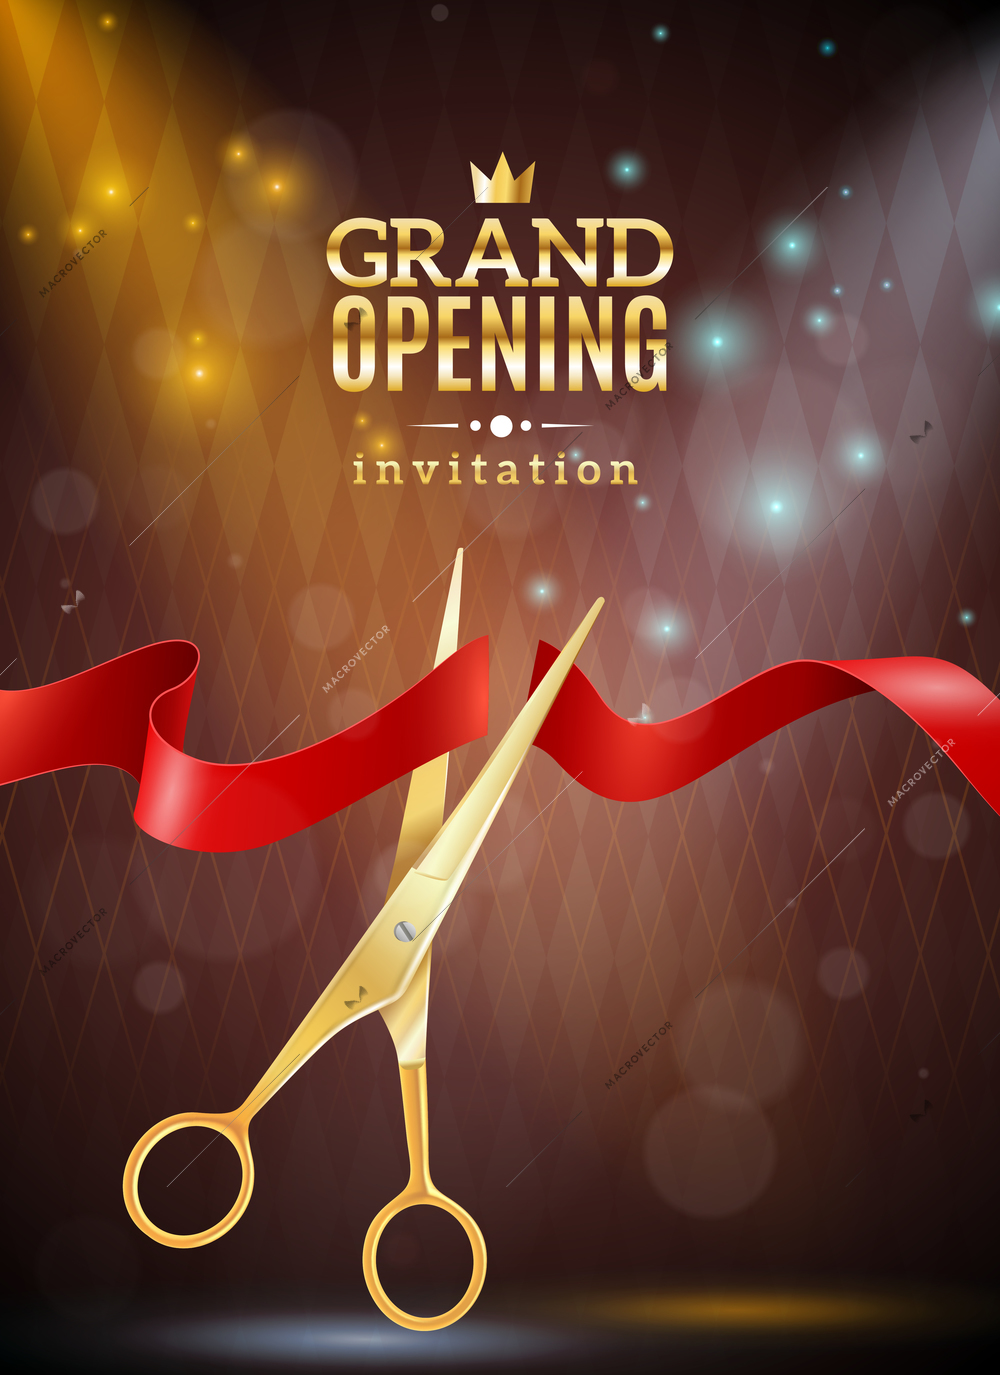 Grand opening invitation realistic background with ribbon and scissors vector illustration